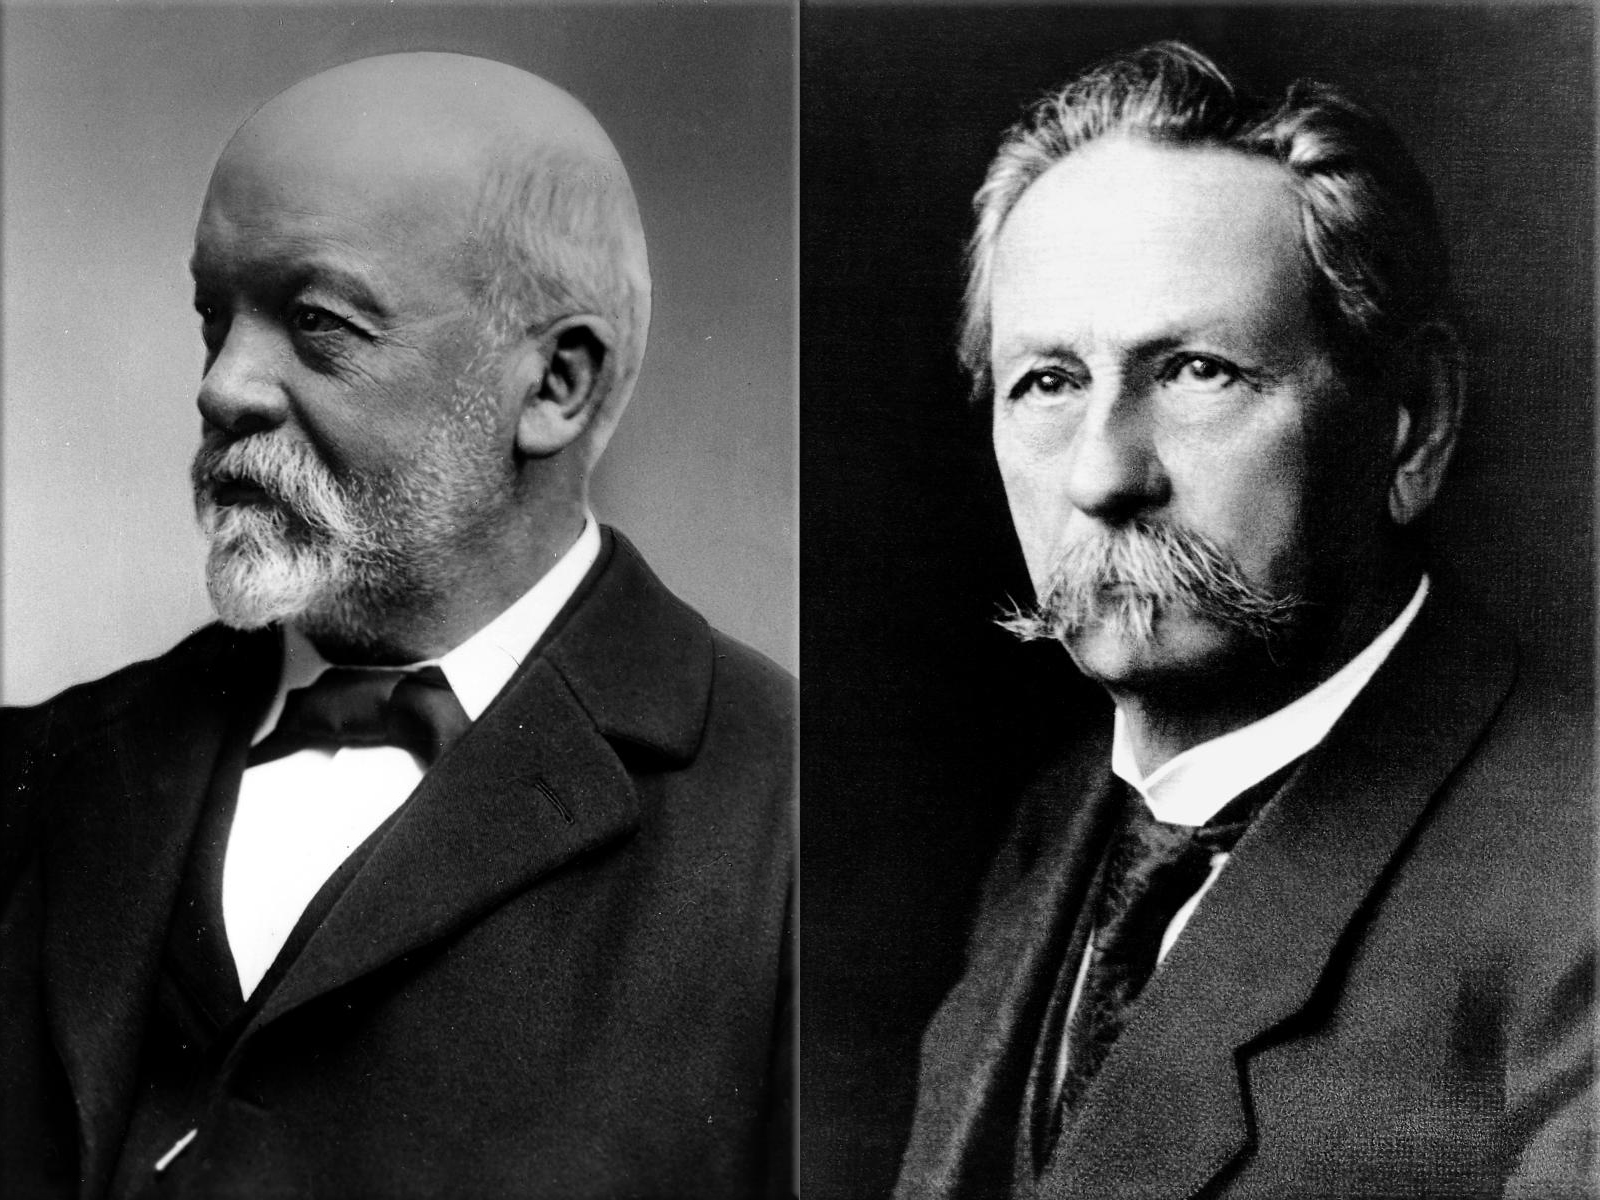 Gottlieb Daimler and Karl Benz merge their two companies into Mercedes-Benz